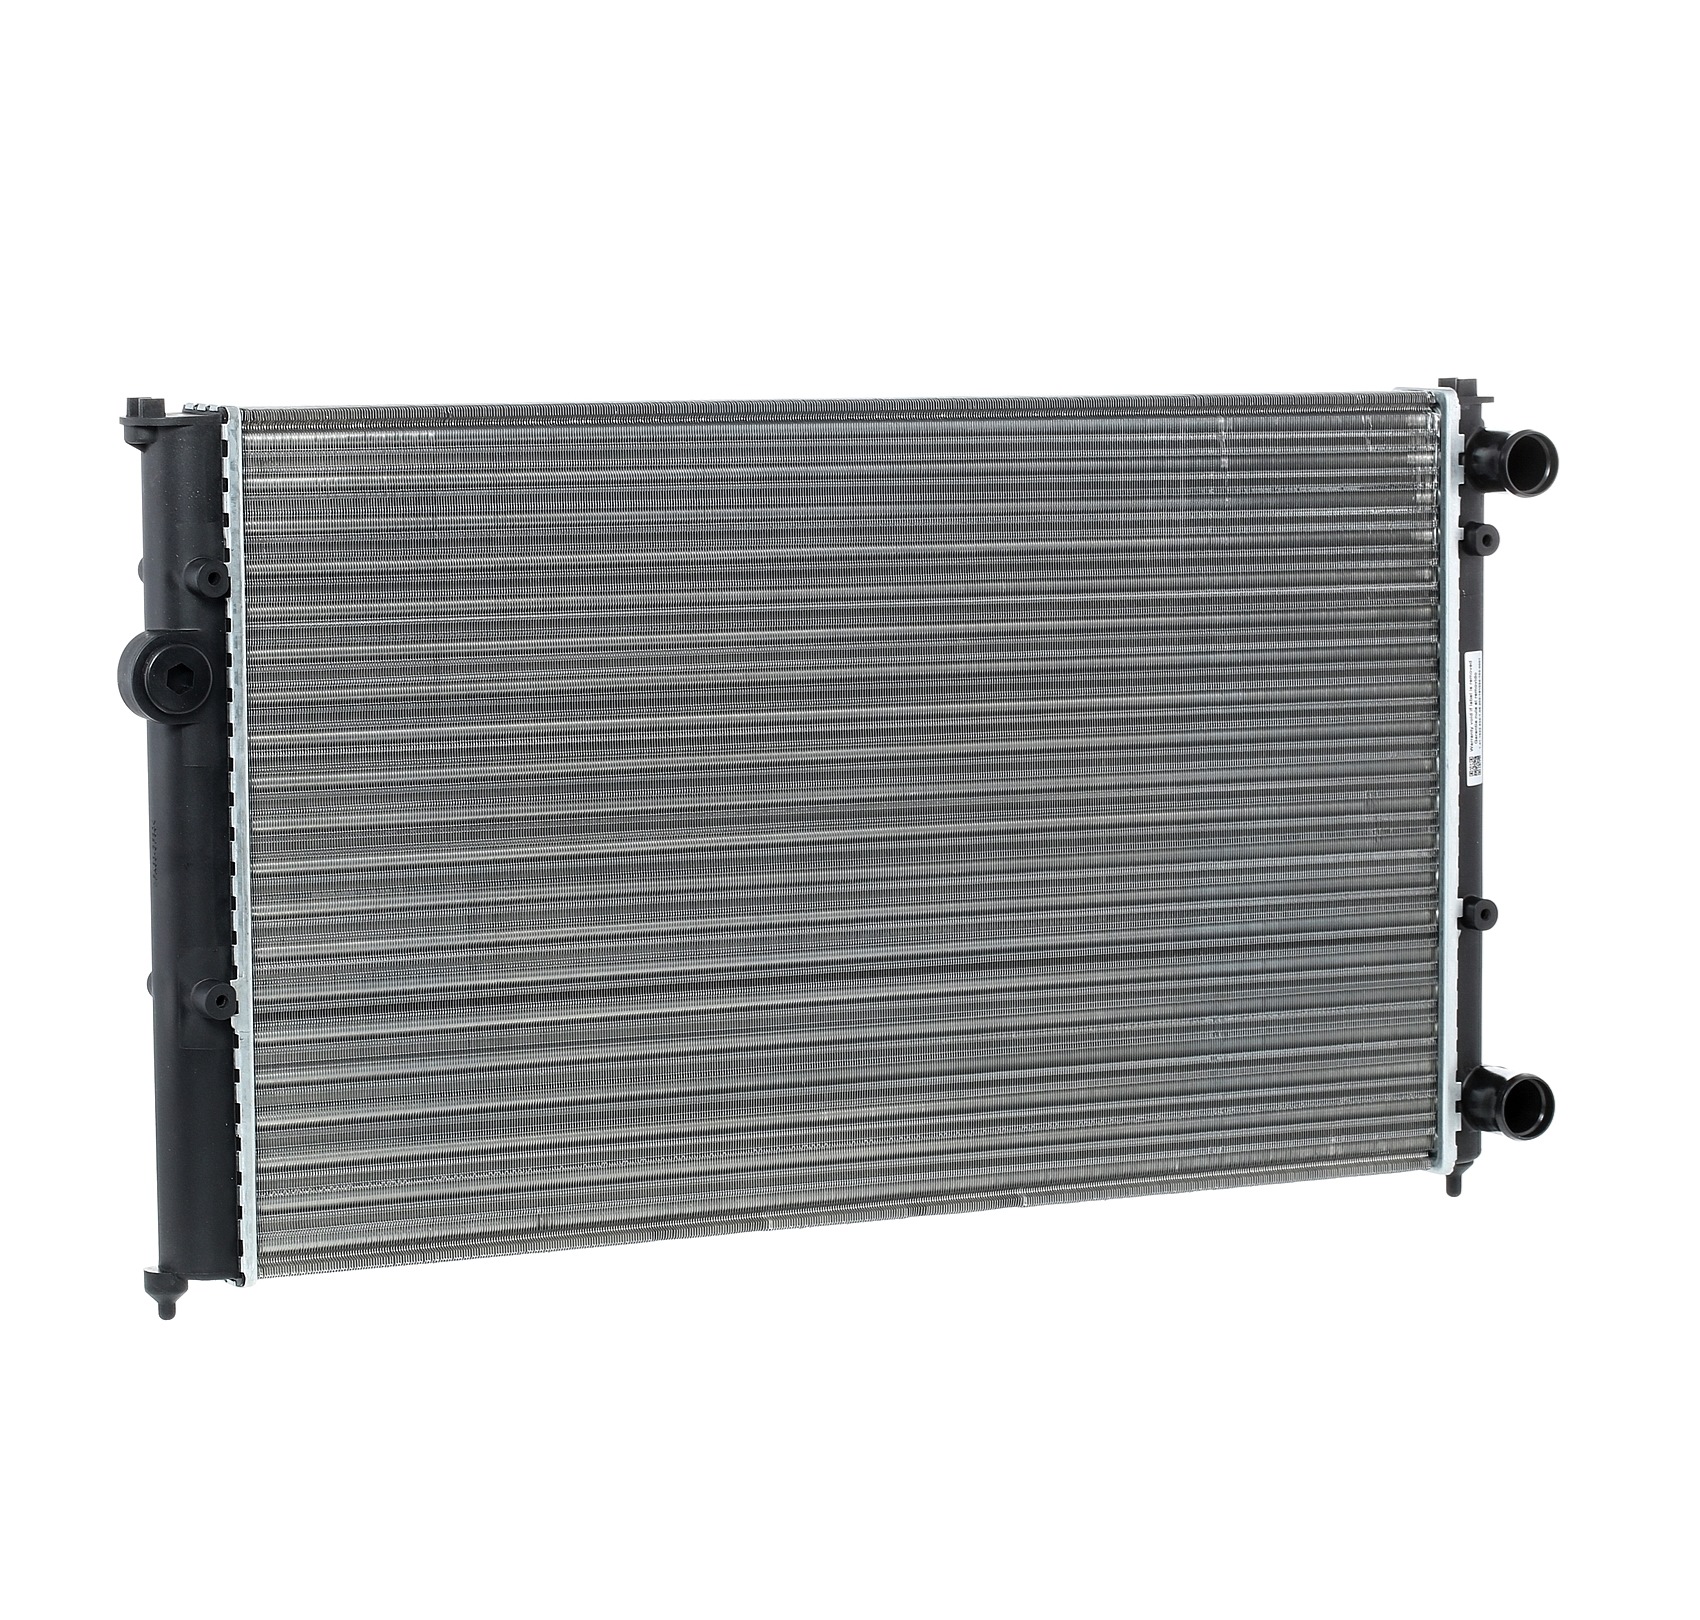 RIDEX Aluminium, for vehicles with air conditioning, 628 x 378 x 34 mm, Manual Transmission, Brazed cooling fins Radiator 470R0432 buy